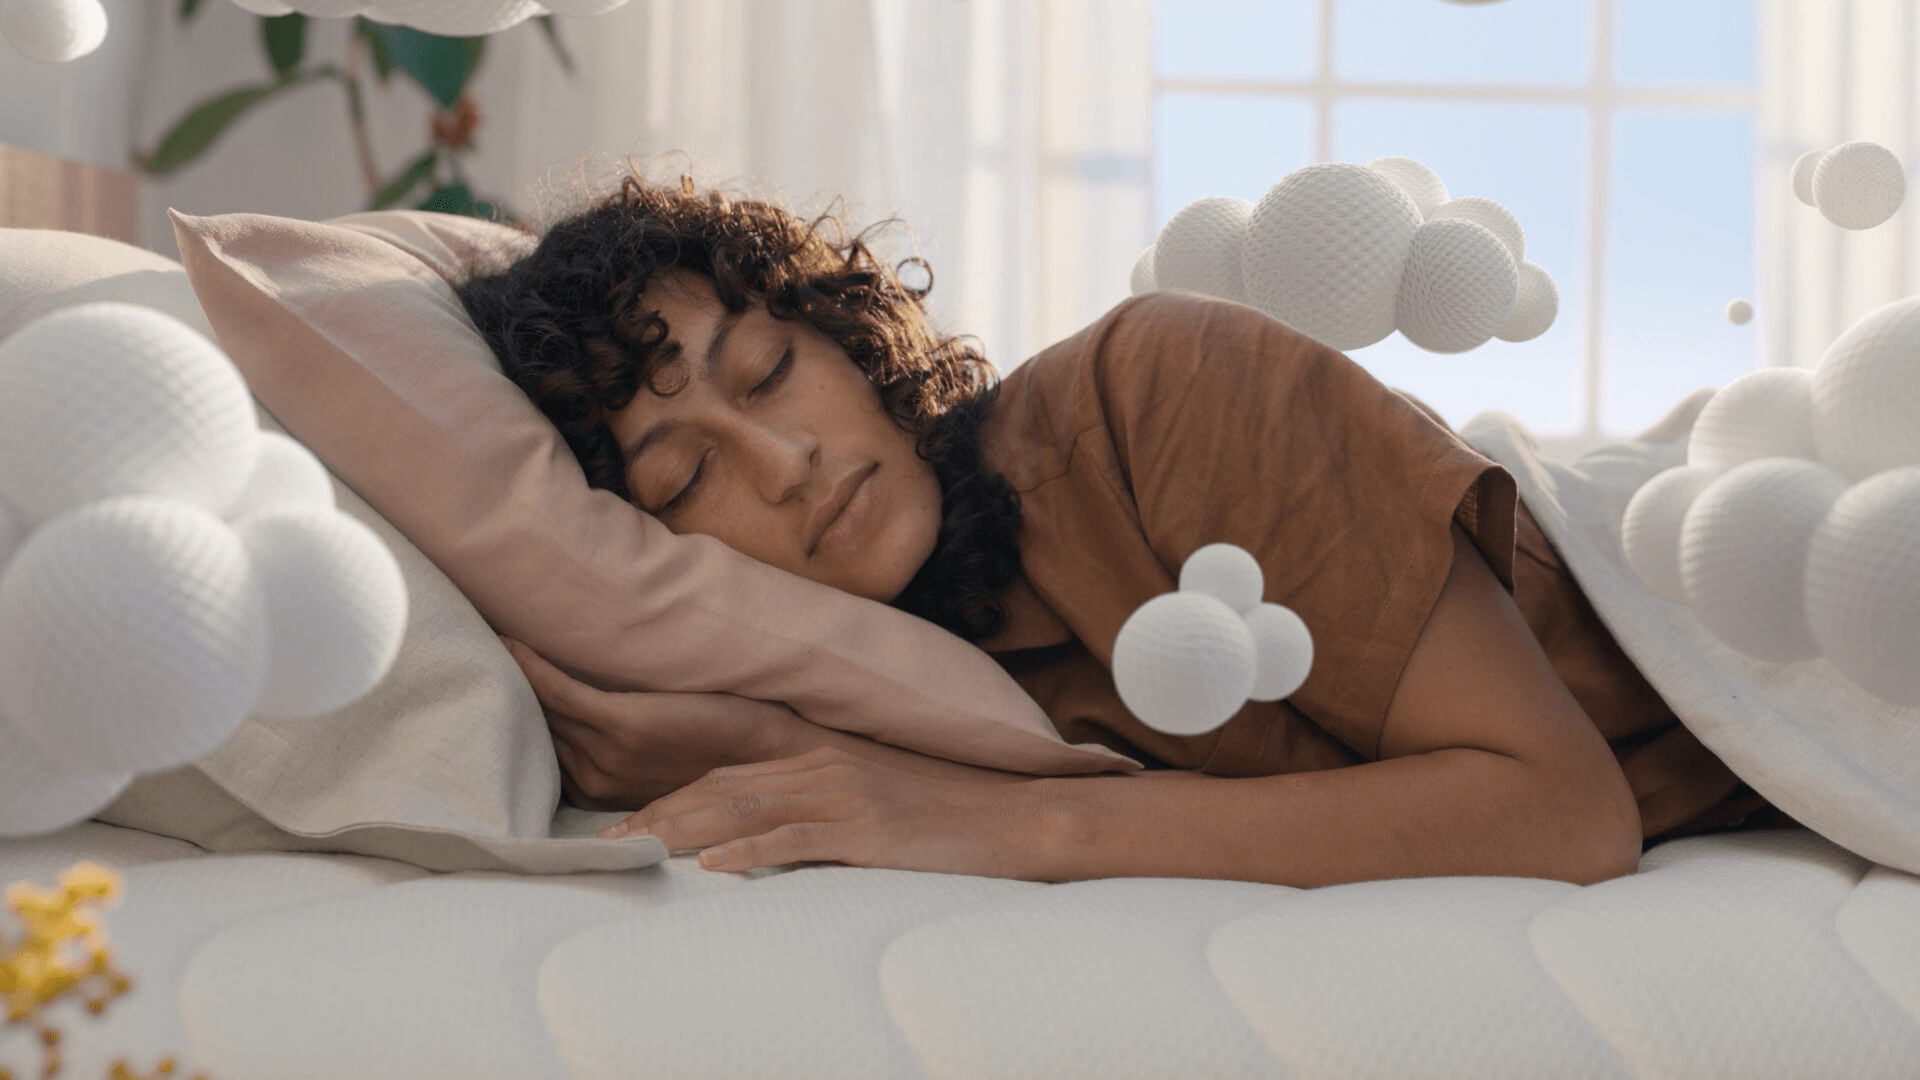 Koala Kloudcel television campaign commercial showing woman laying on bed.